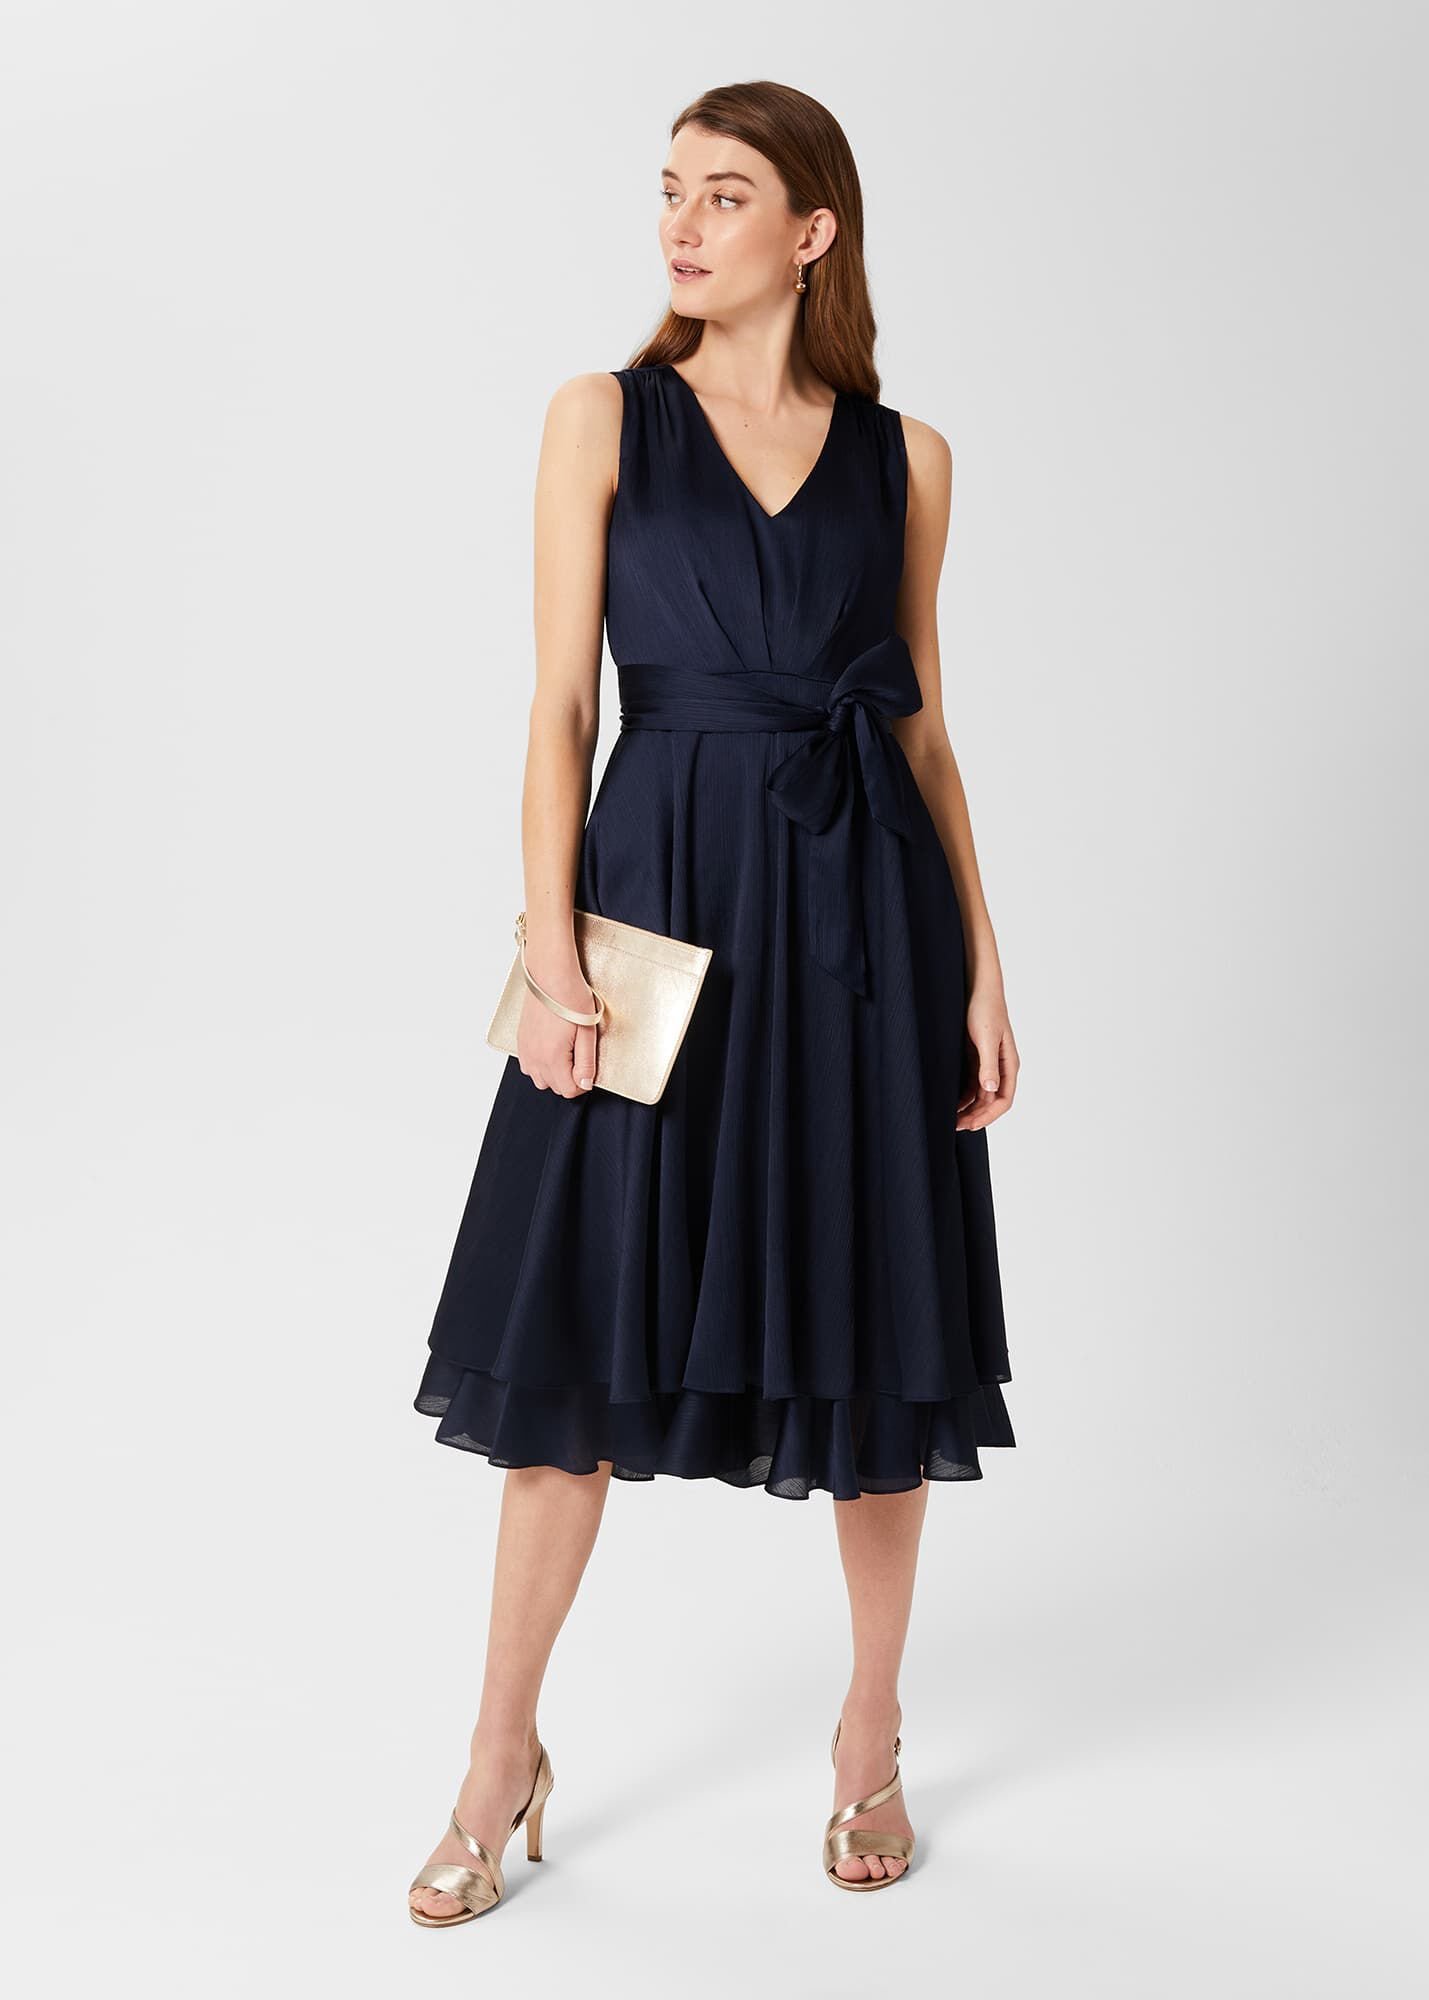 Hobbs London Viola Fit And Flare Dress Midnight Navy Tiered Skirt